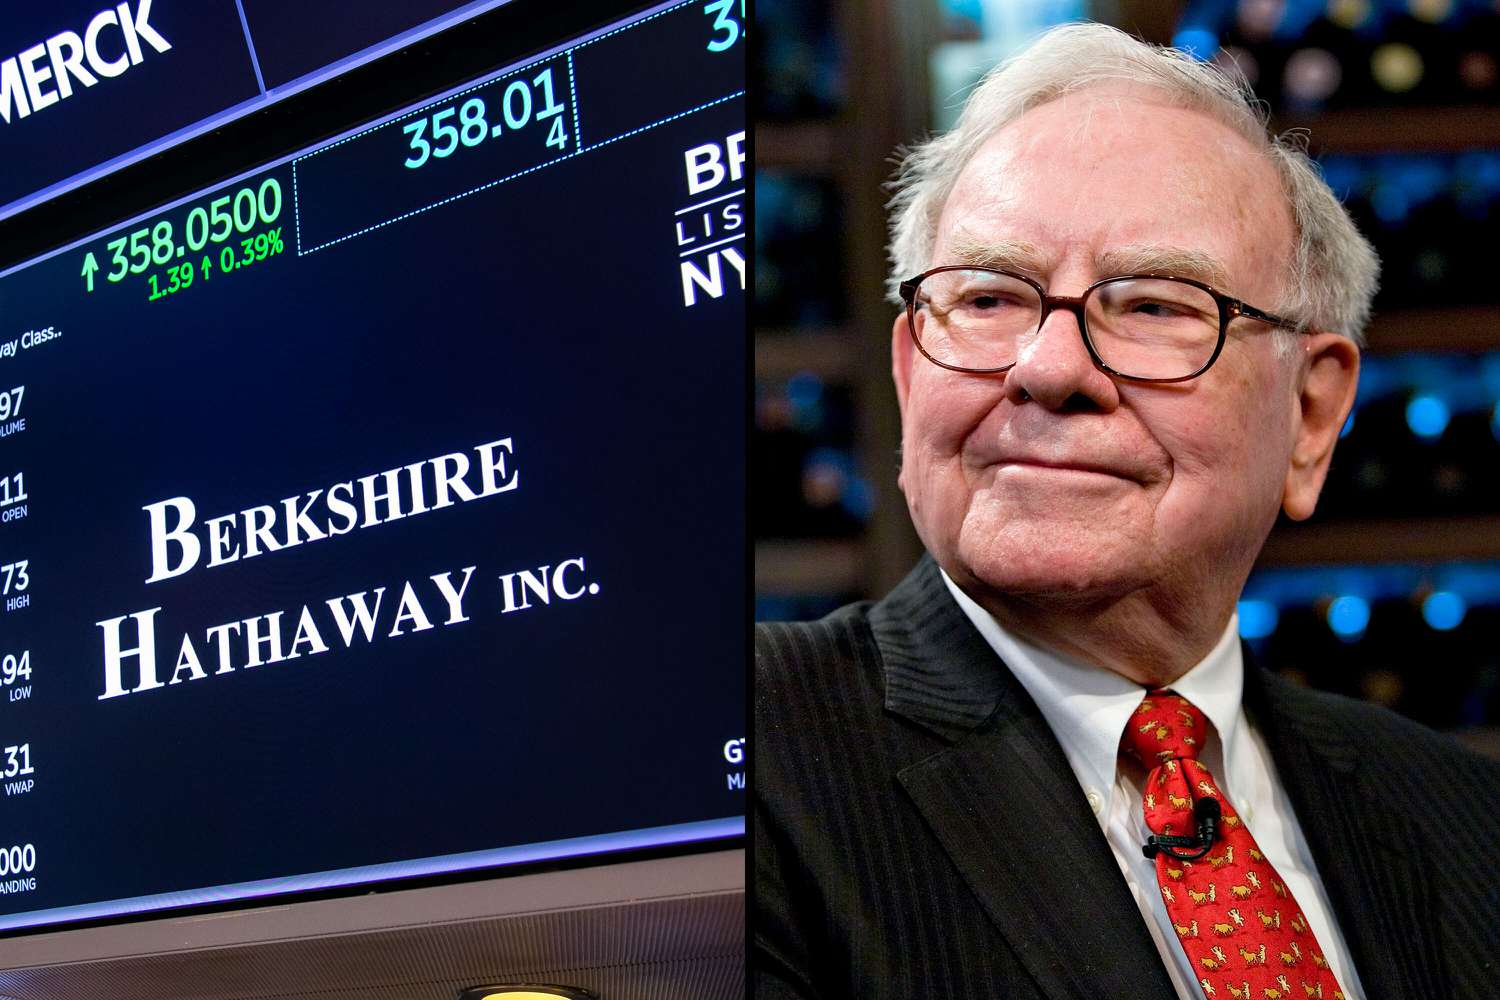 What You Need To Know Ahead of Warren Buffett’s Berkshire Hathaway